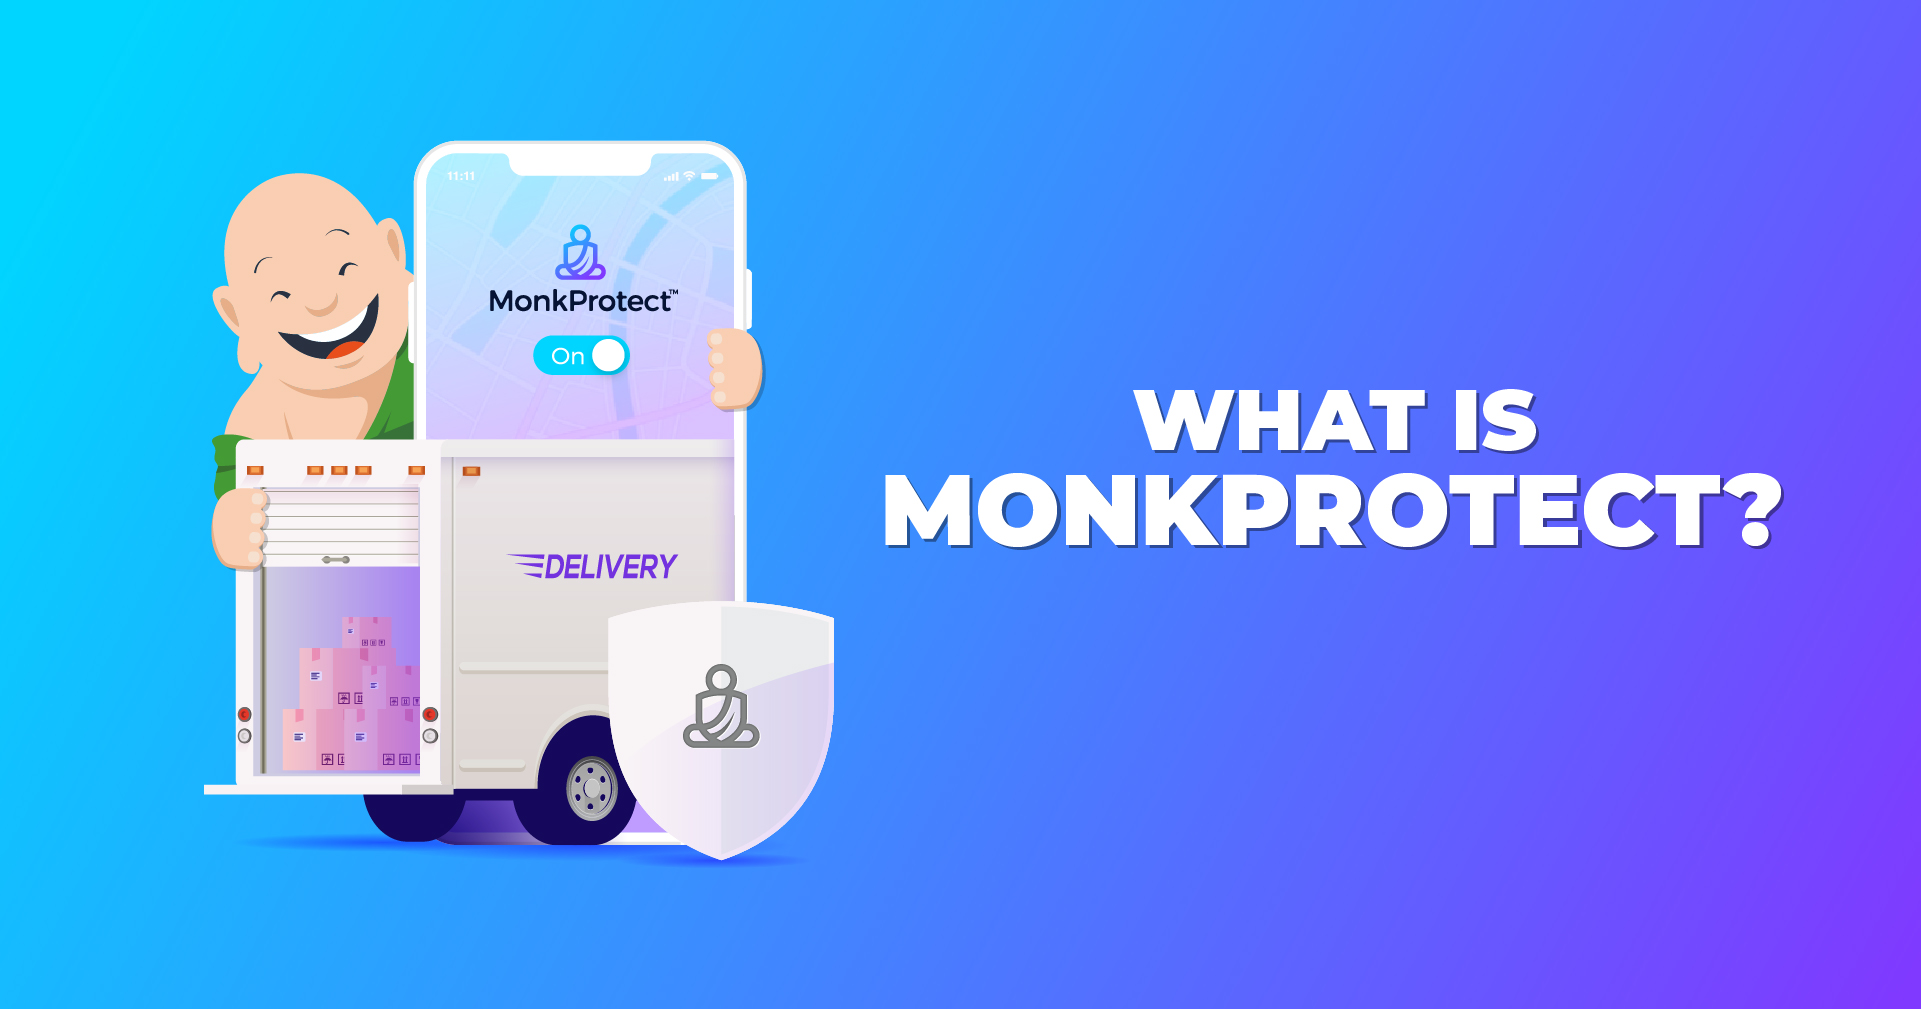 What is MonkProtect?